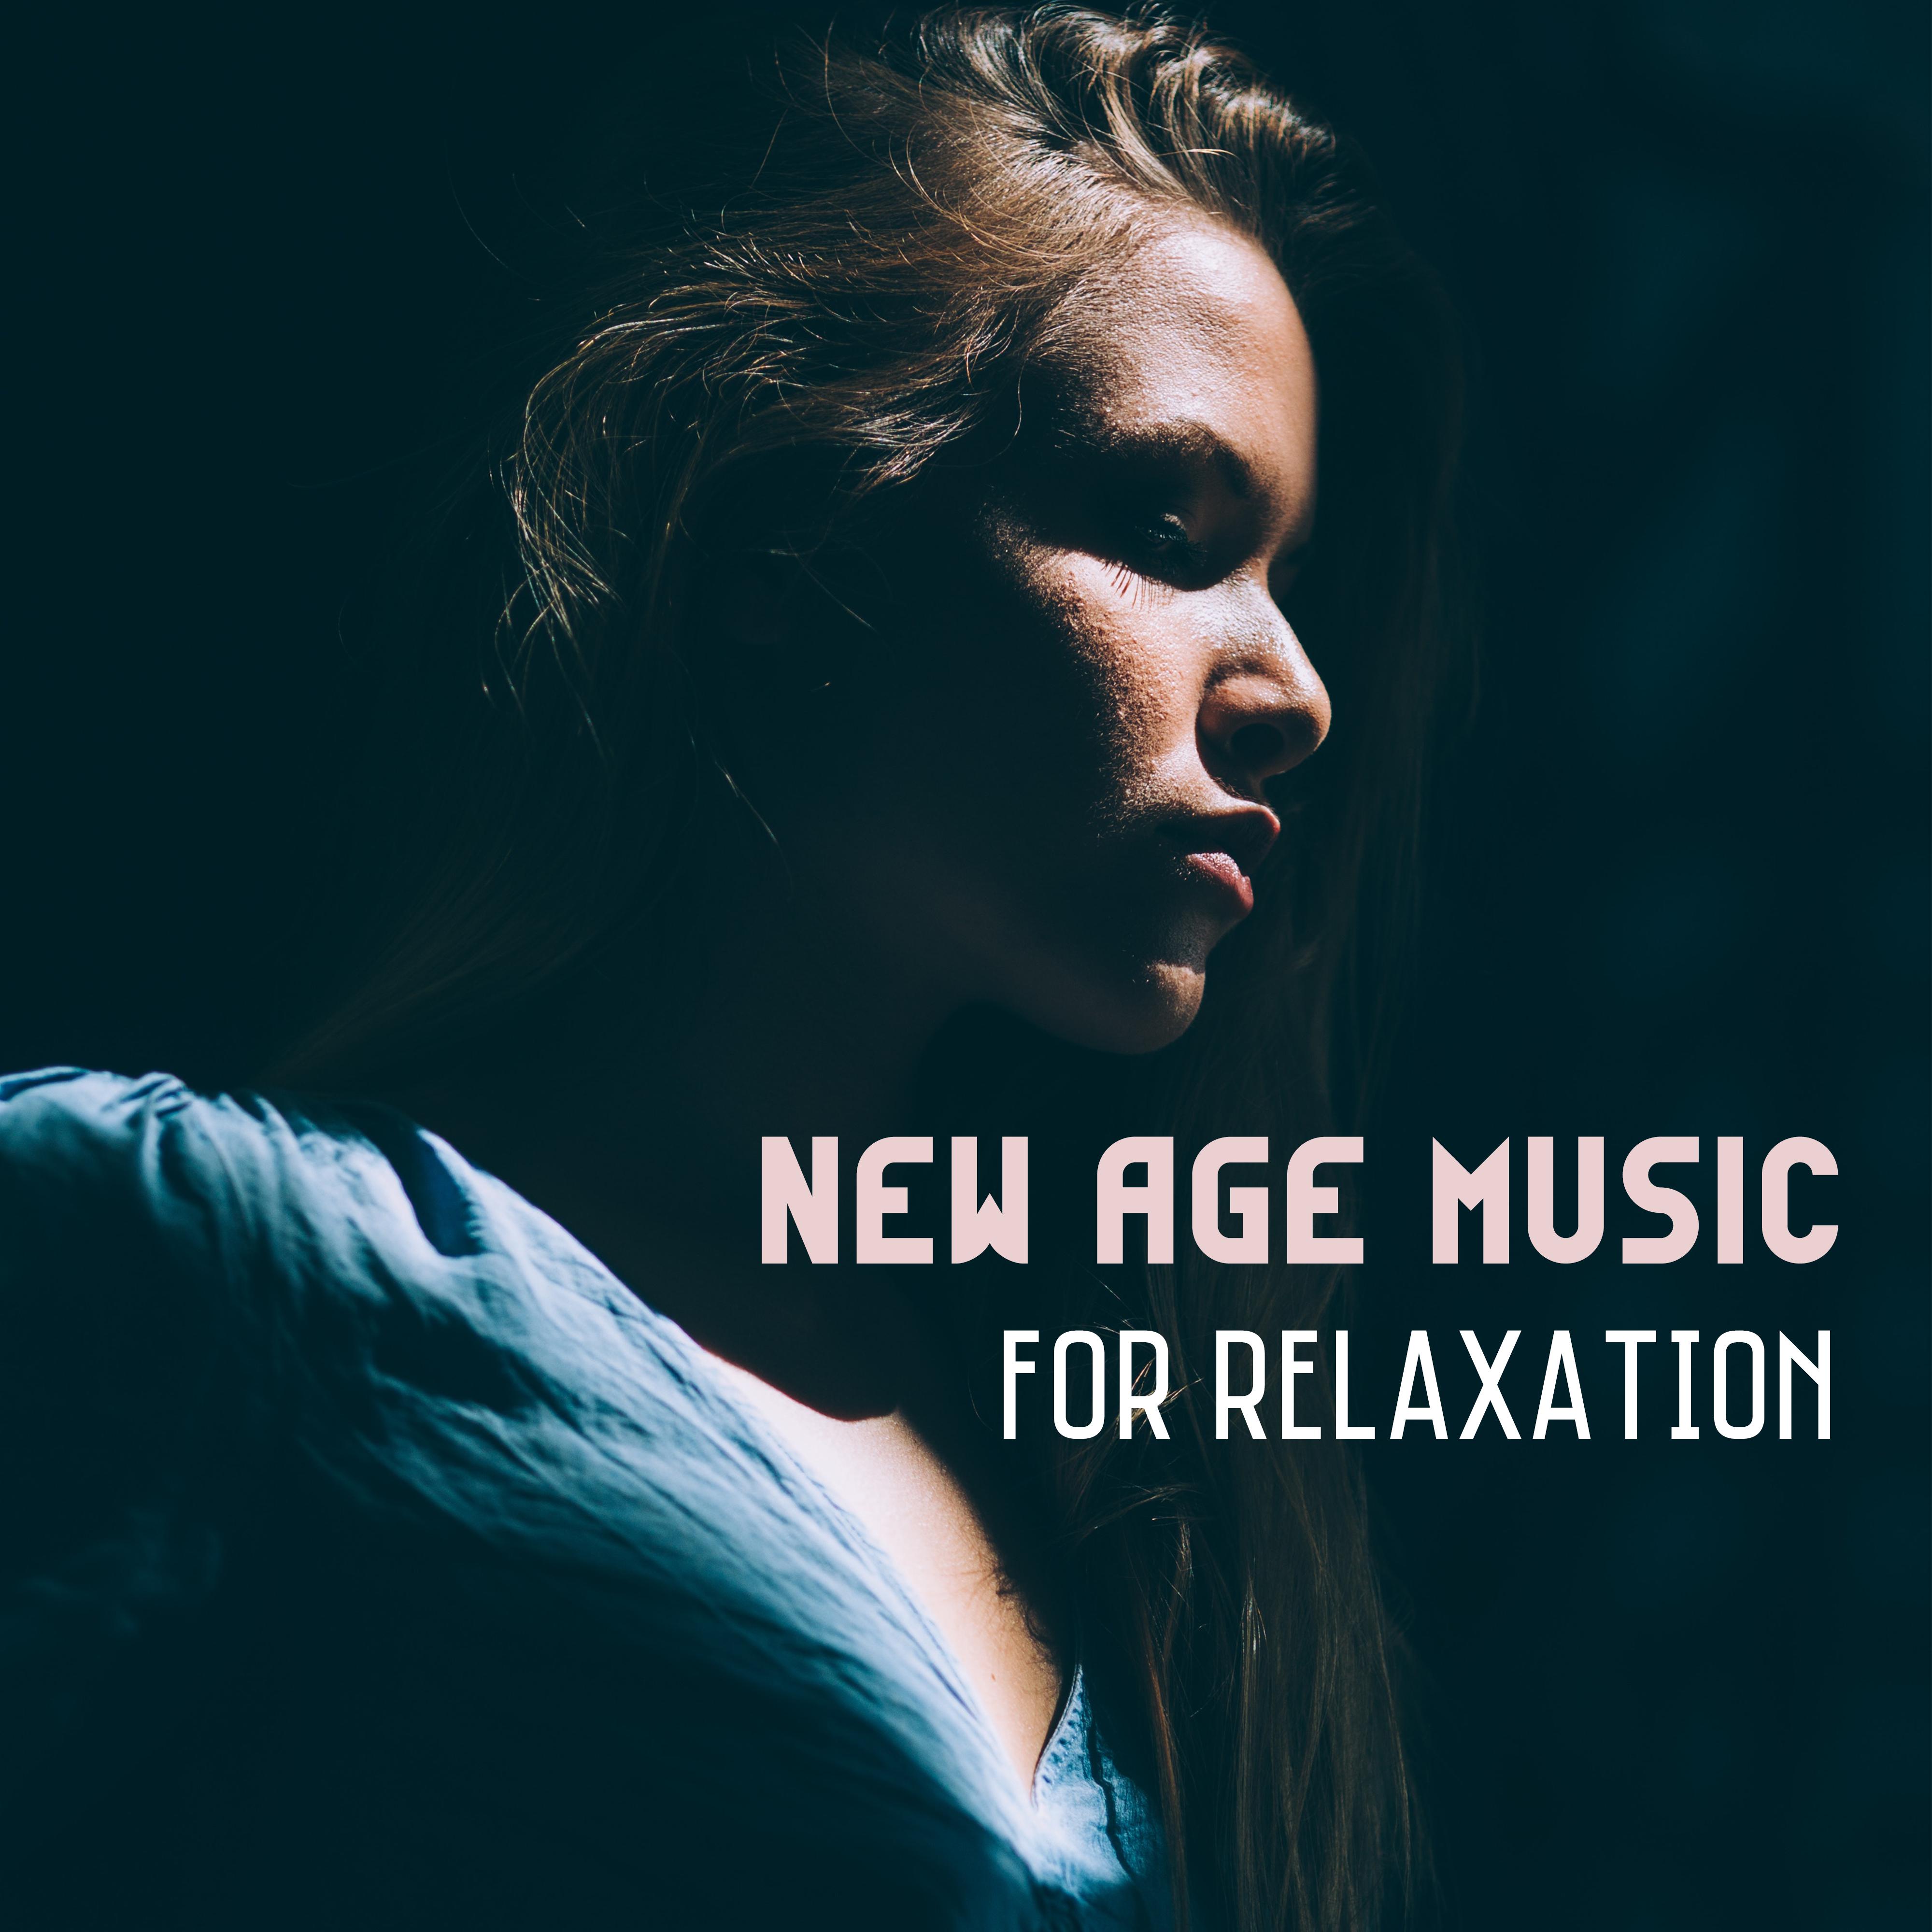 New Age Music for Relaxation